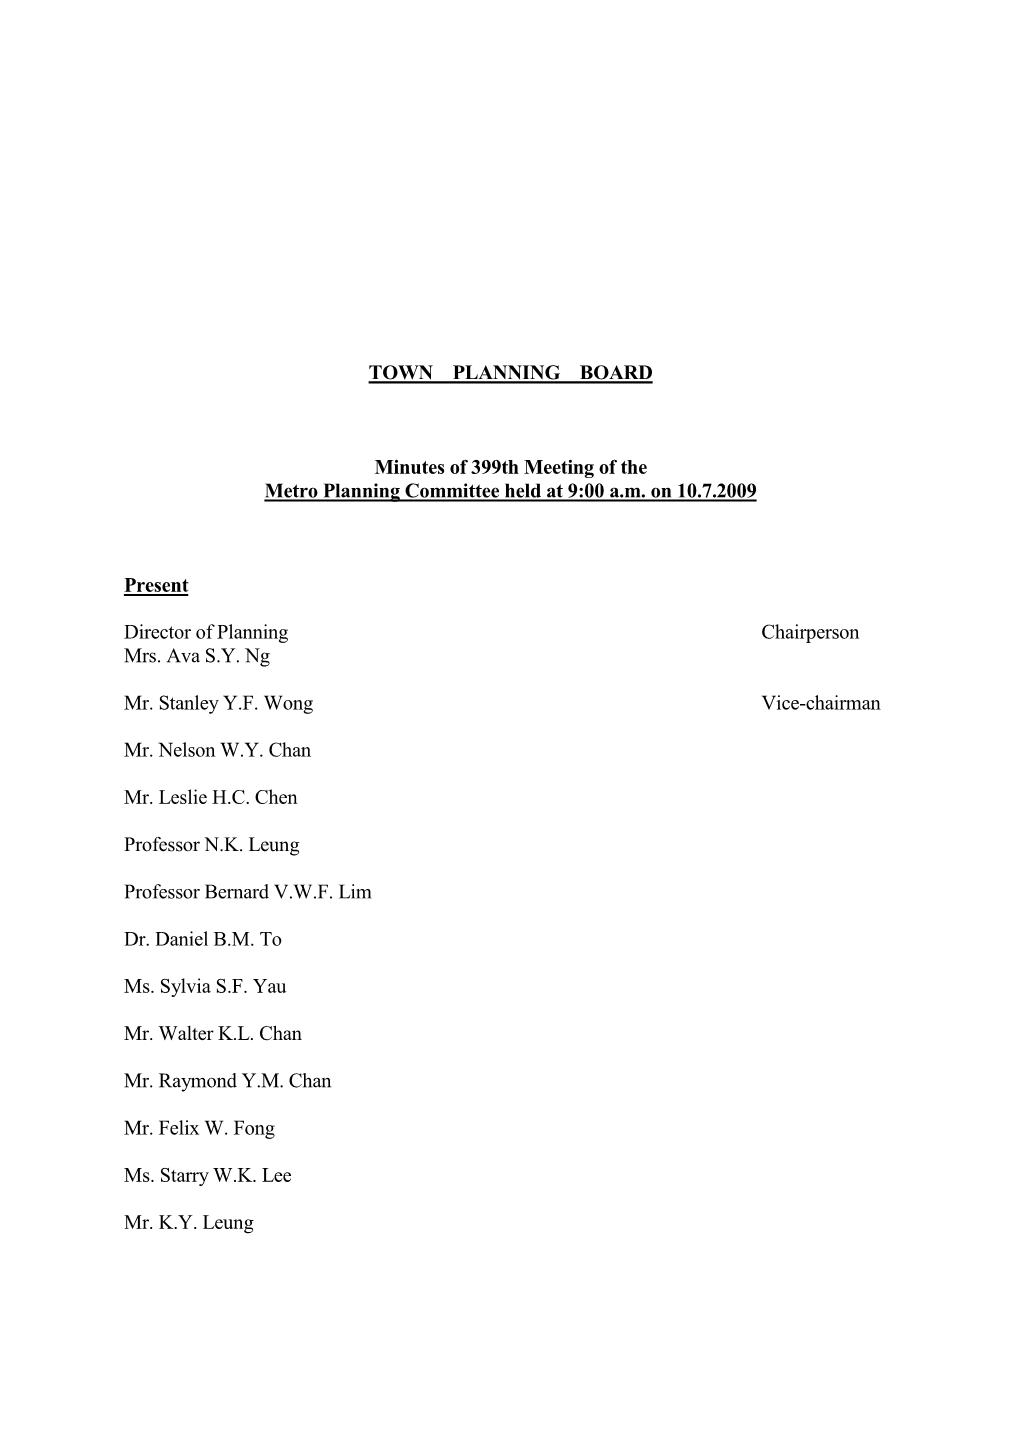 TOWN PLANNING BOARD Minutes of 399Th Meeting of the Metro